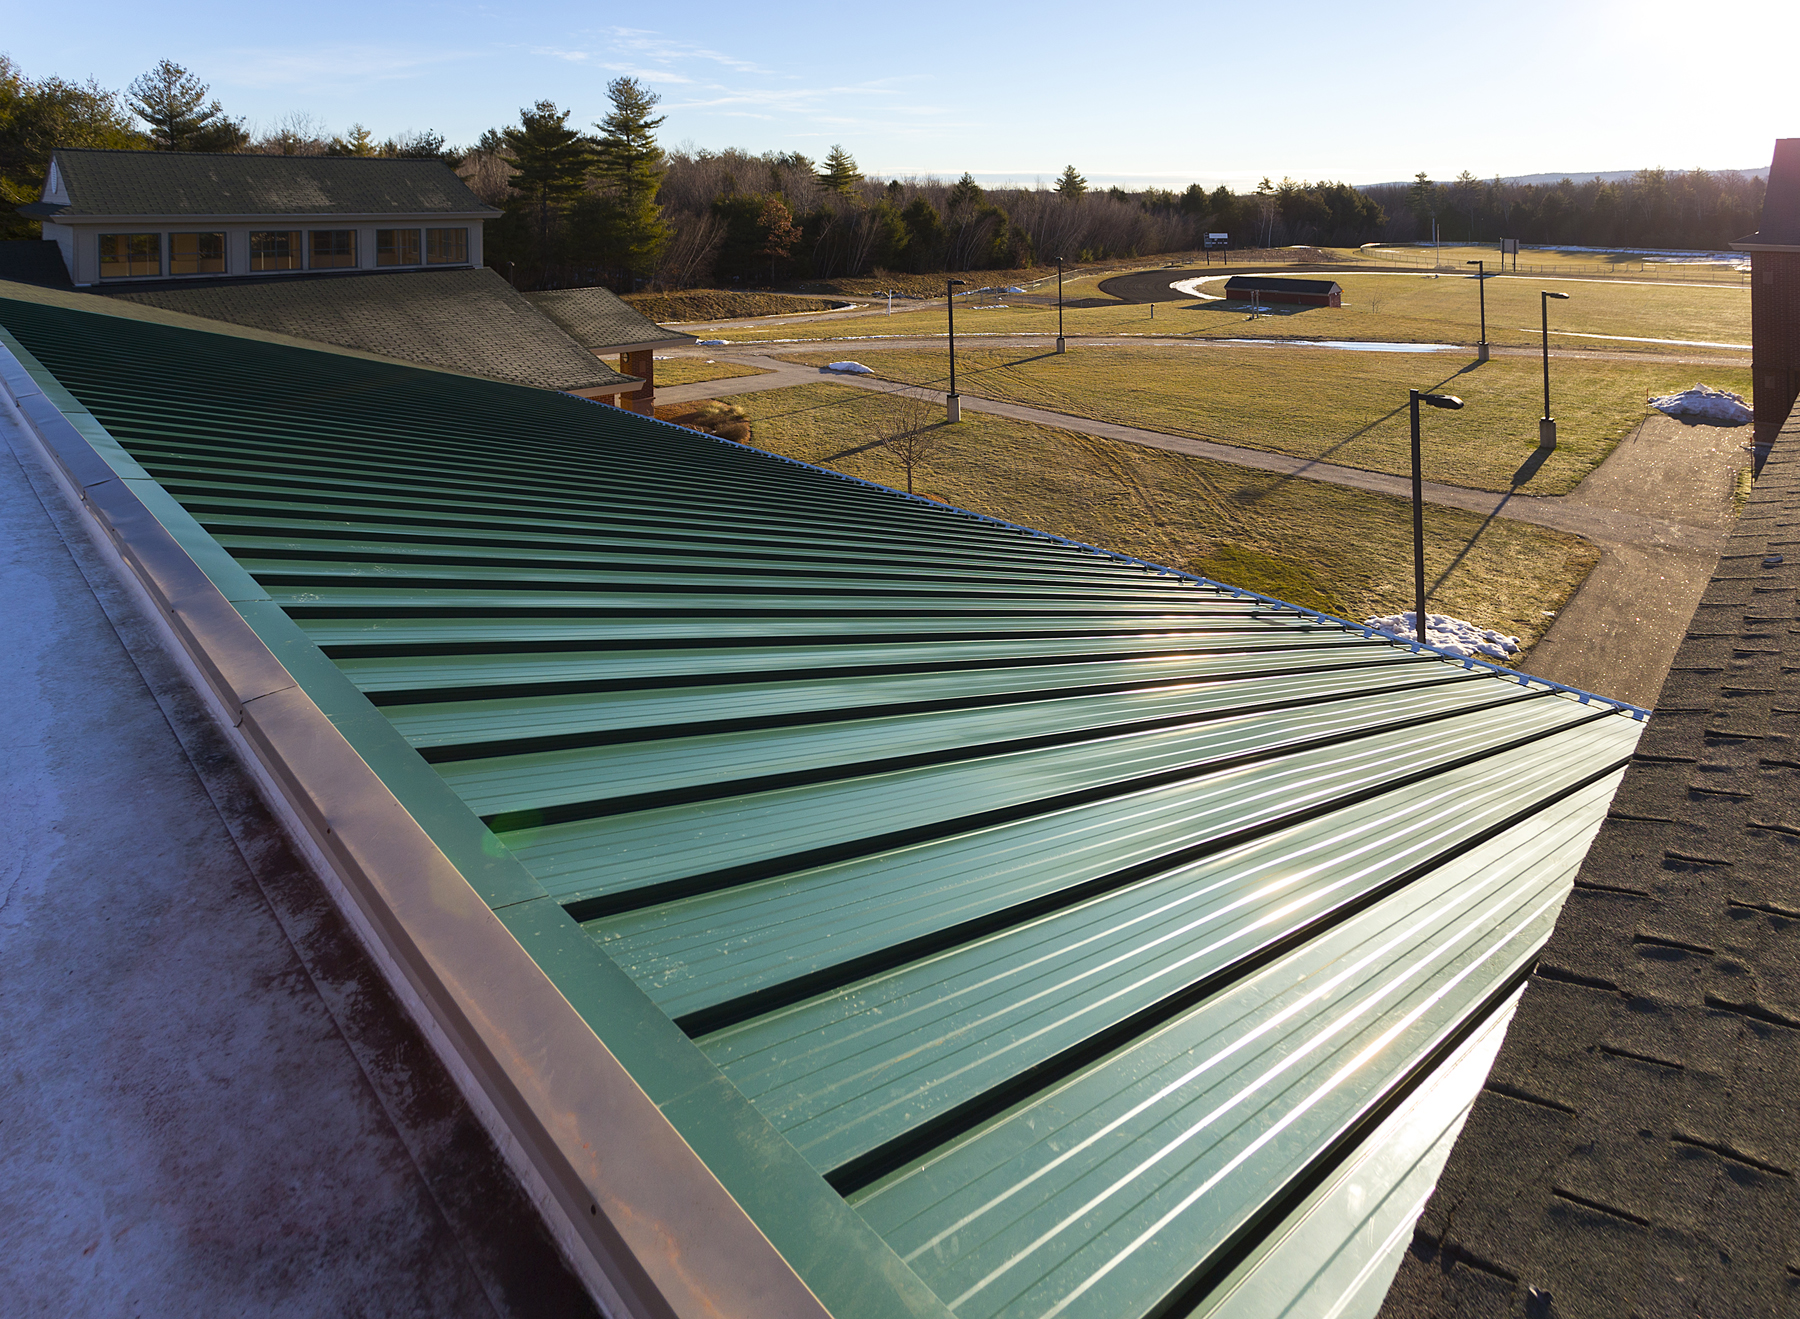 R-Mer® Shield boasts a 2-inch high vertical seam with an extruded aluminum clip and top rail system that provide unrivaled wind uplift performance